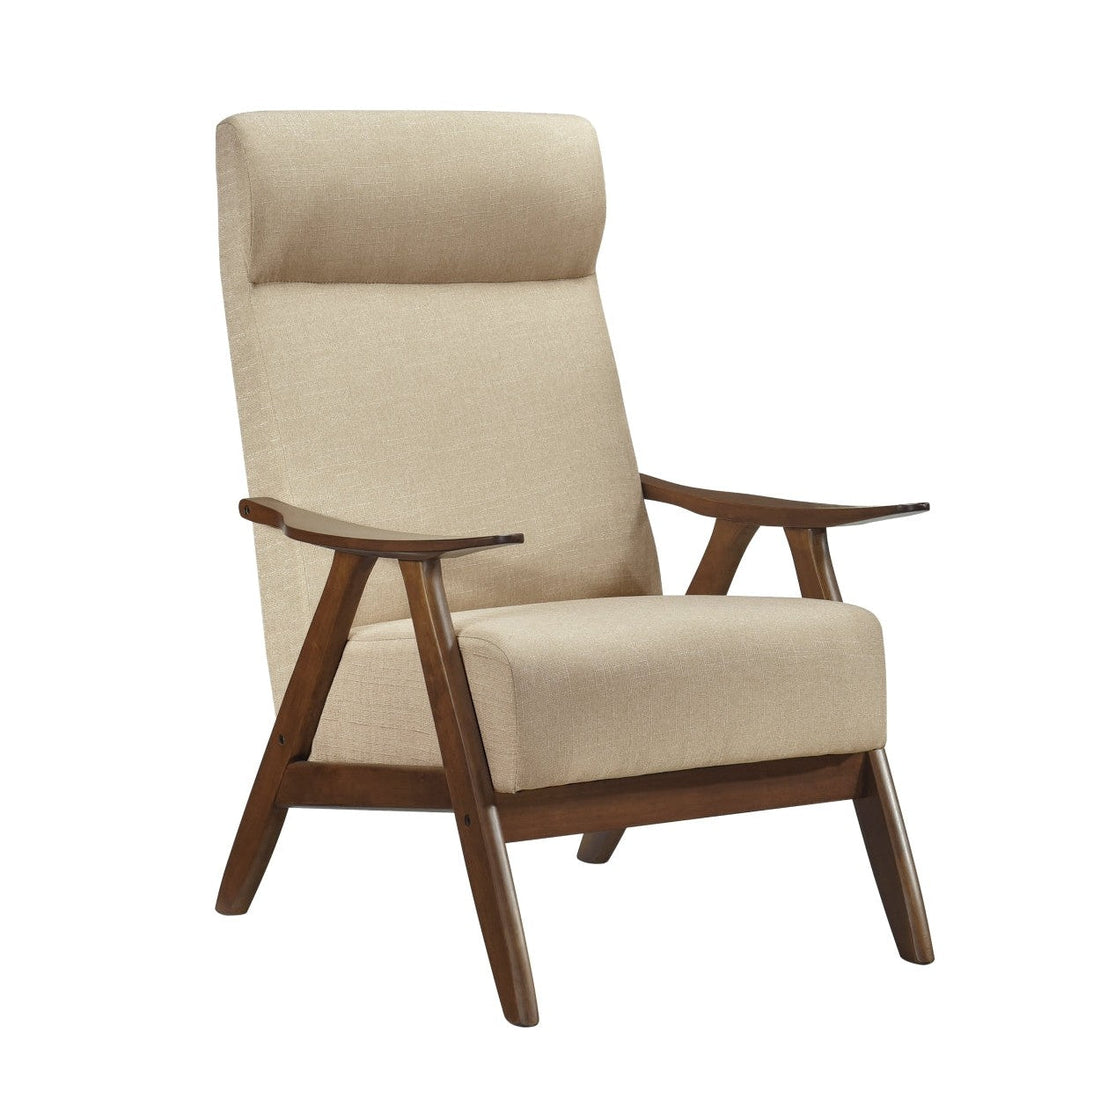 ACCENT CHAIR, LIGHT BROWN TEXTURED FABRIC 1077BR-1